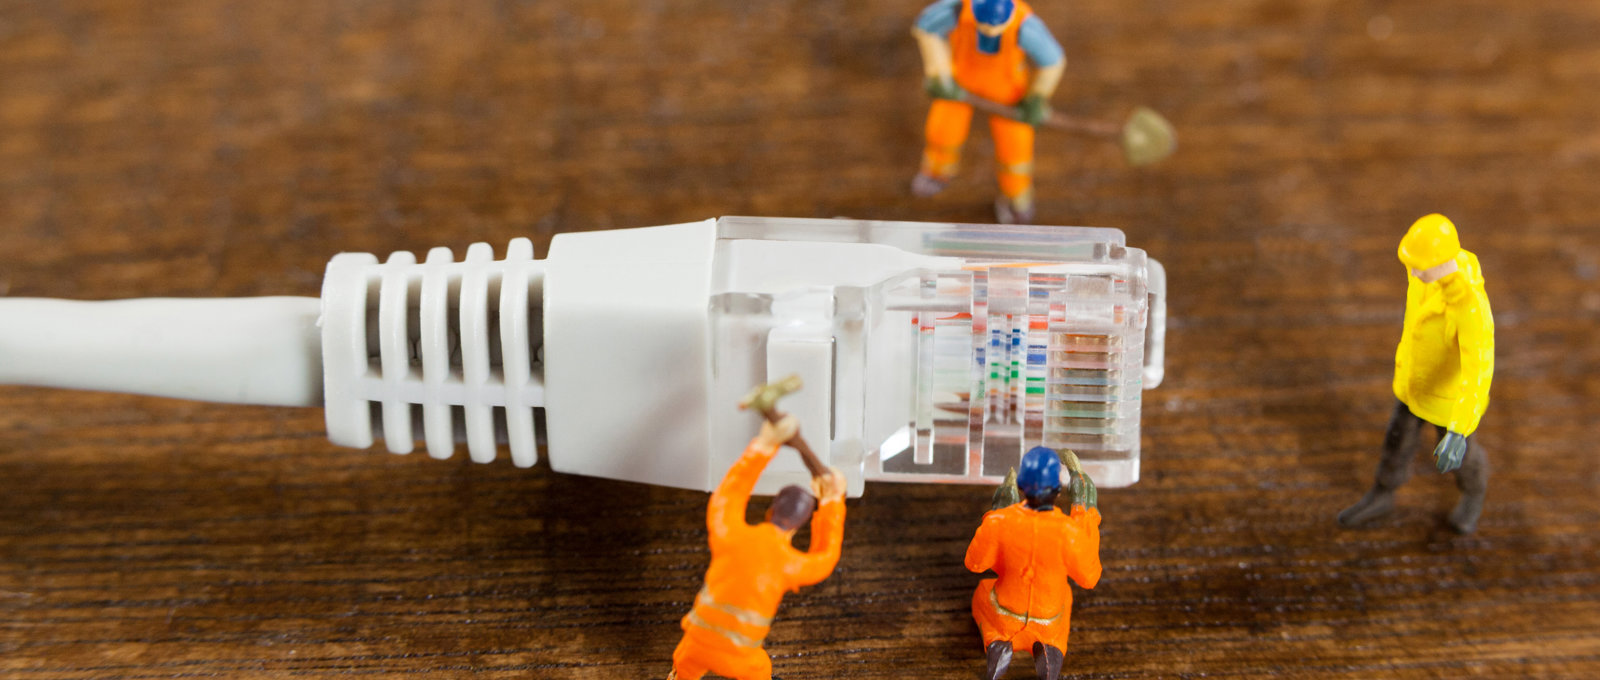 Super close up photo of a computer ethernet plug with four tiny models of 'engineers' working around it